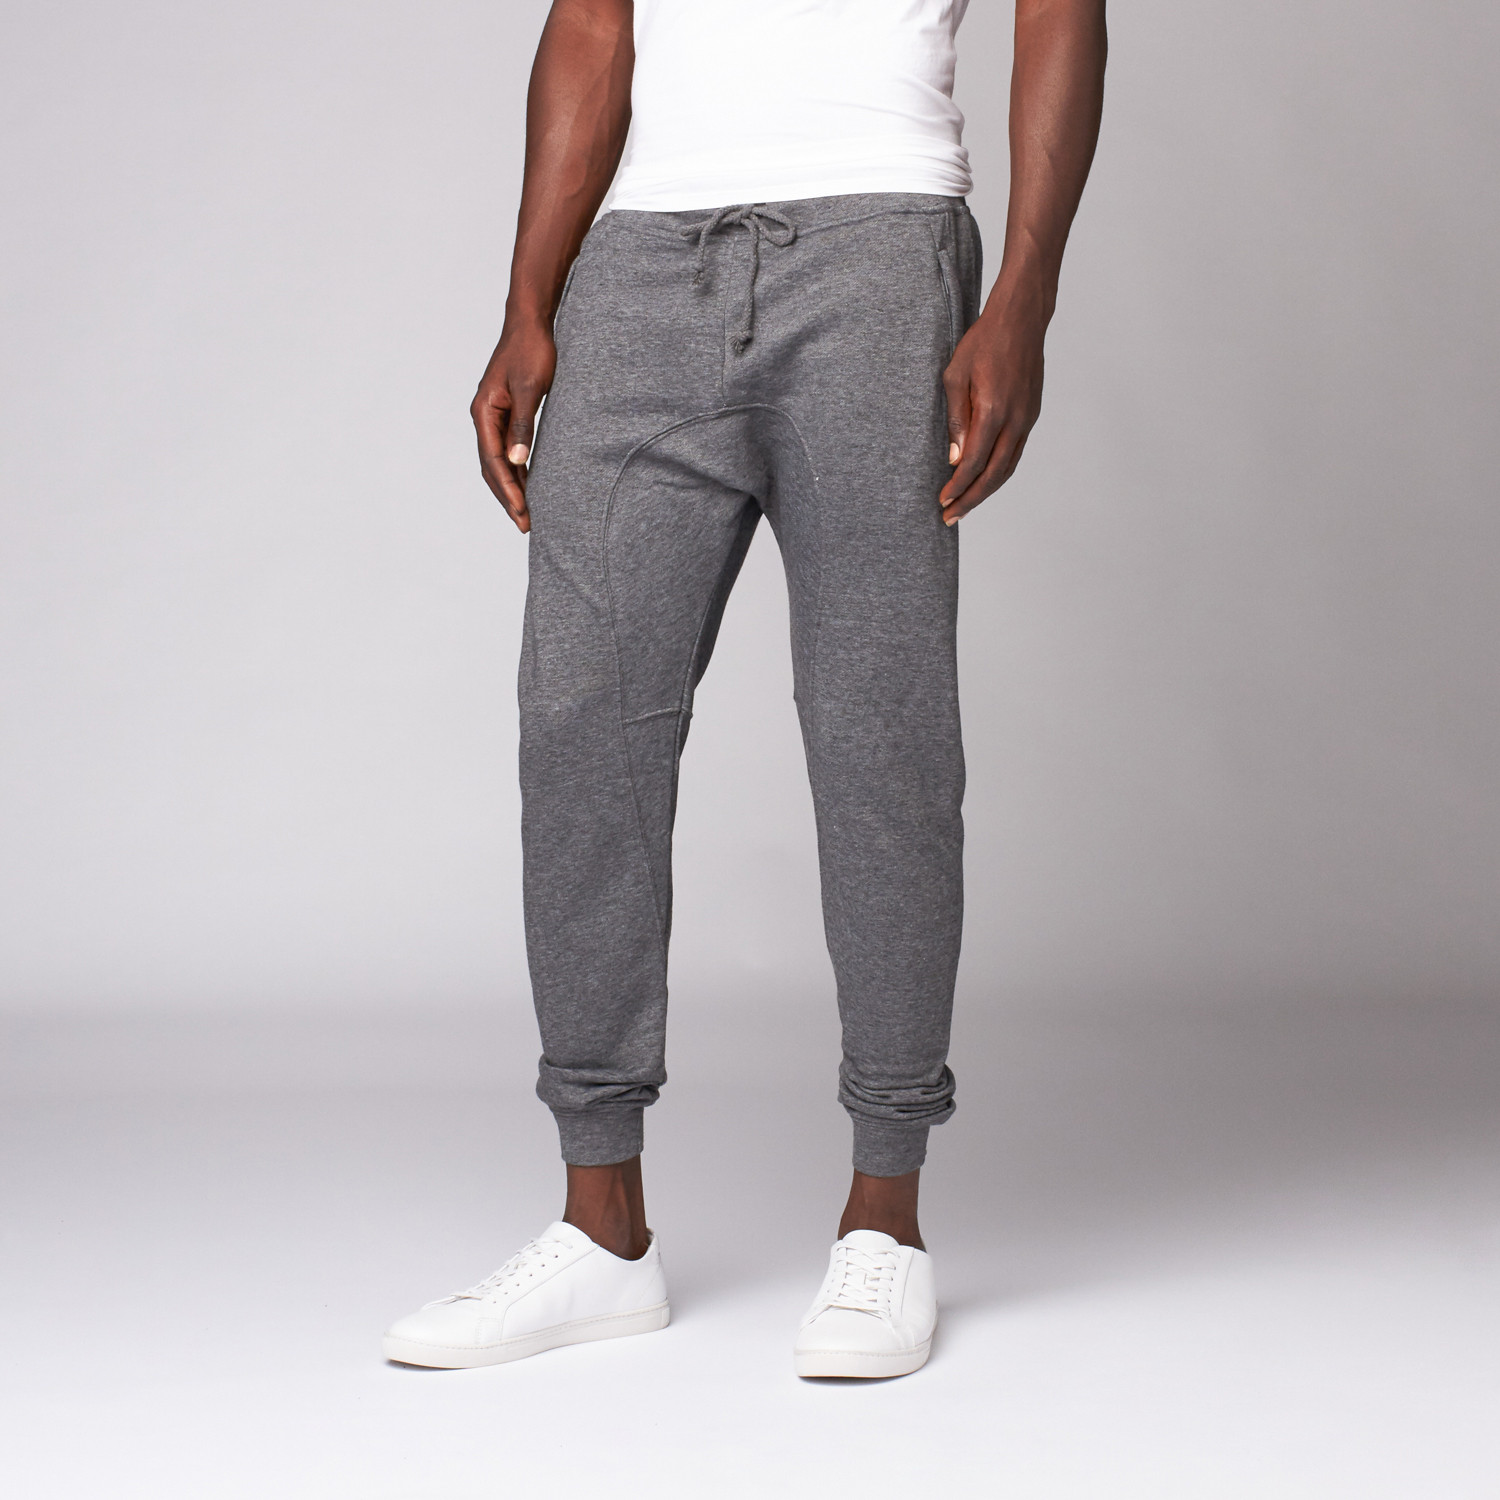 00 Nothing // Genius Joggers // Grey (S) - Casual Cool - Touch of Modern